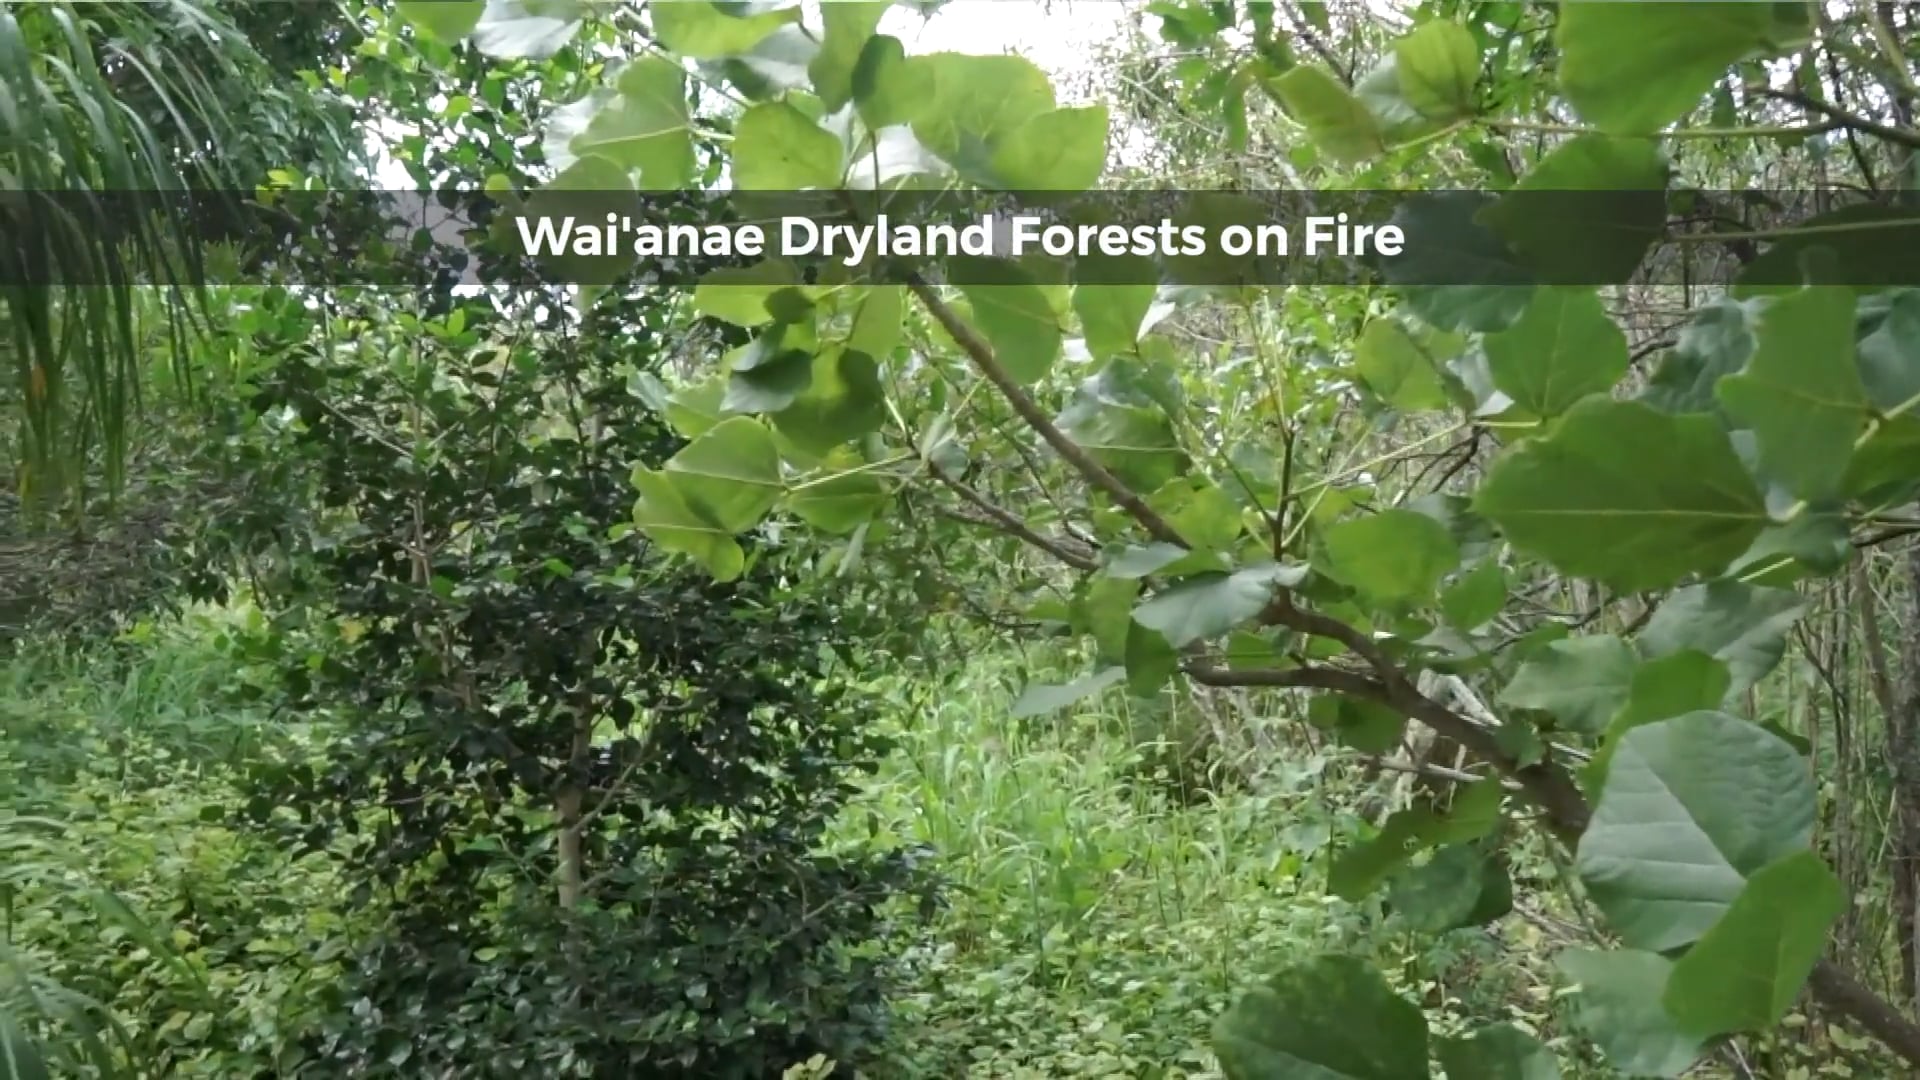 Wai'anae Dryland Forests on Fire (2)